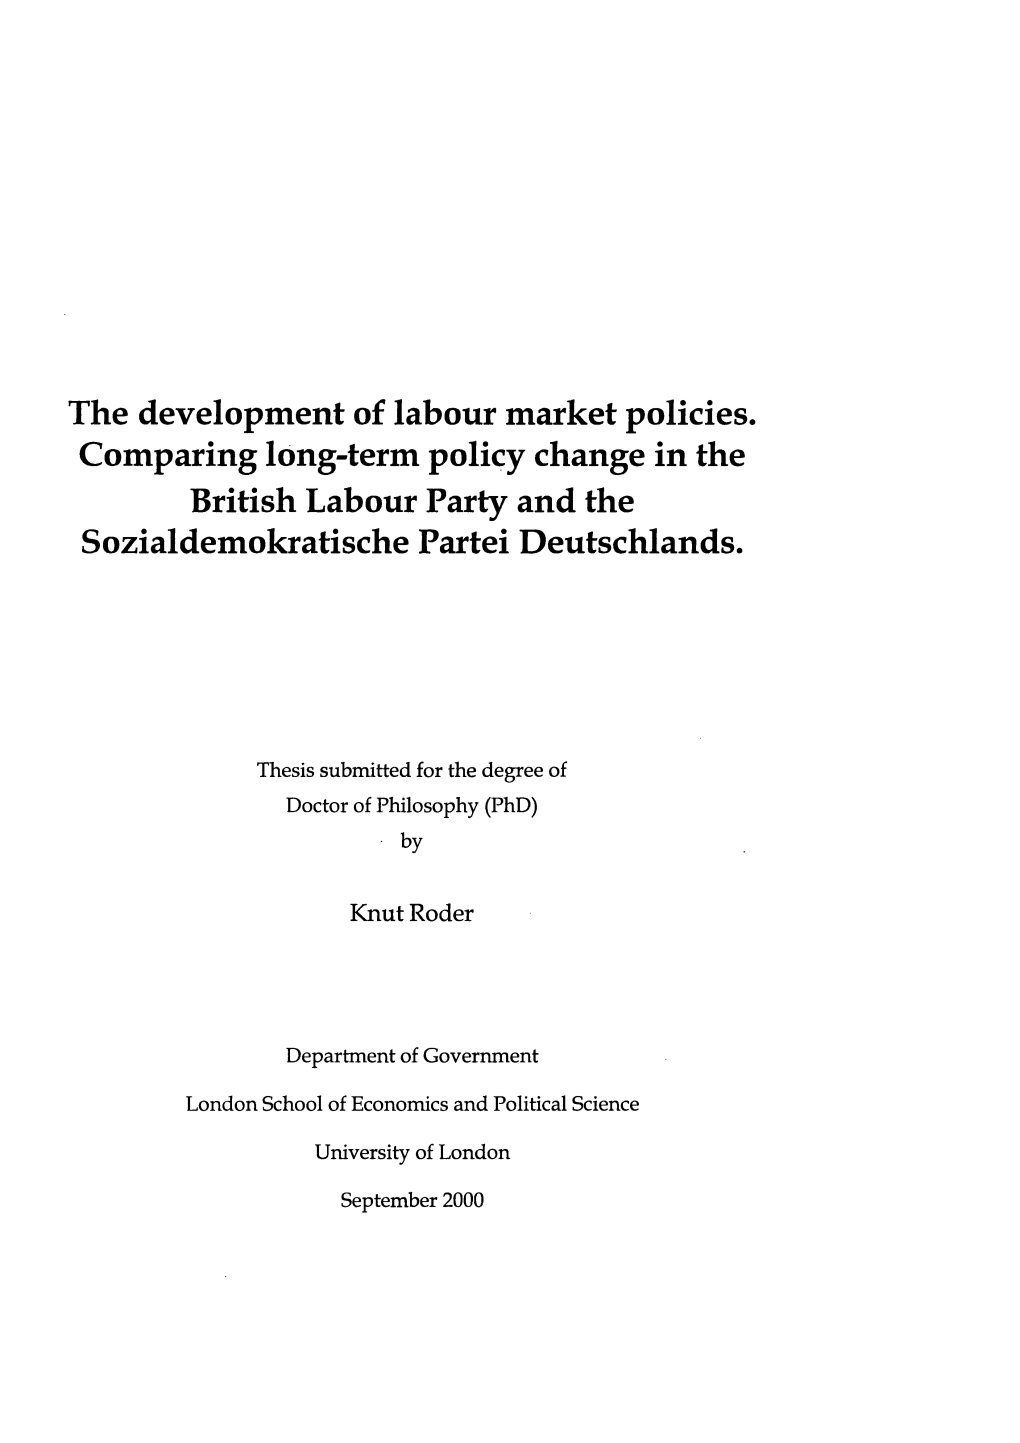 The Development of Labour Market Policies. Comparing Long-Term Policy Change in the British Labour Party and the Sozialdemokratische Partei Deutschlands